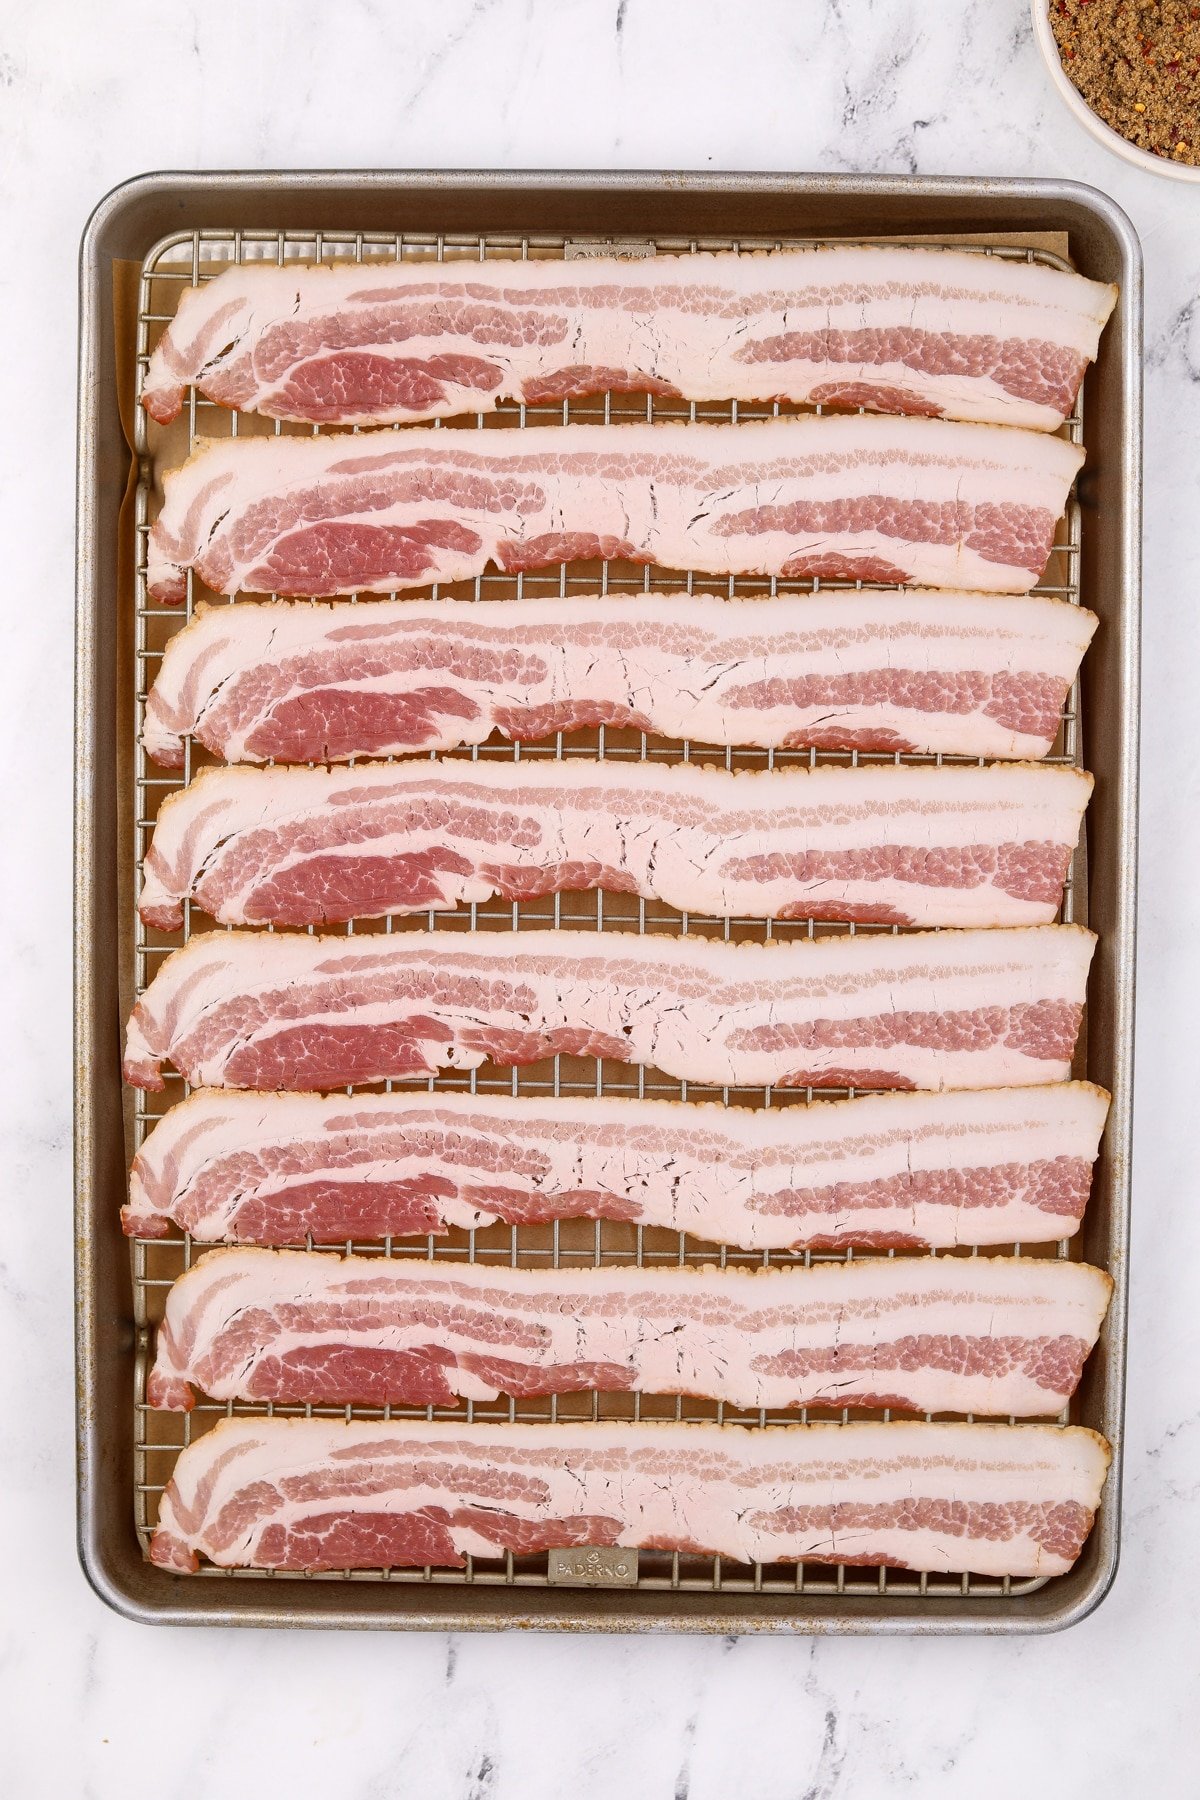 A baking sheet filled with bacon slices.